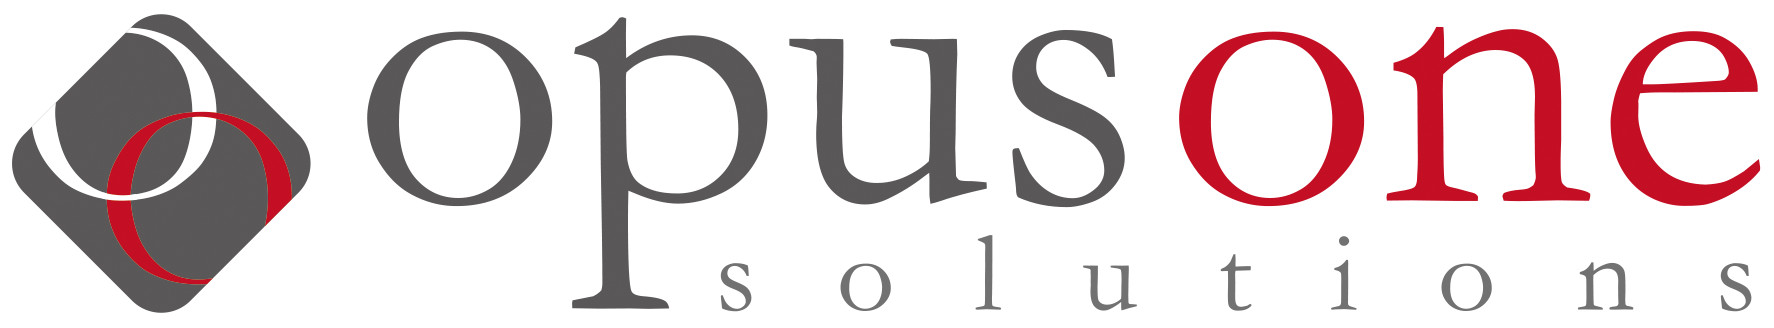 Opus One Solutions, 